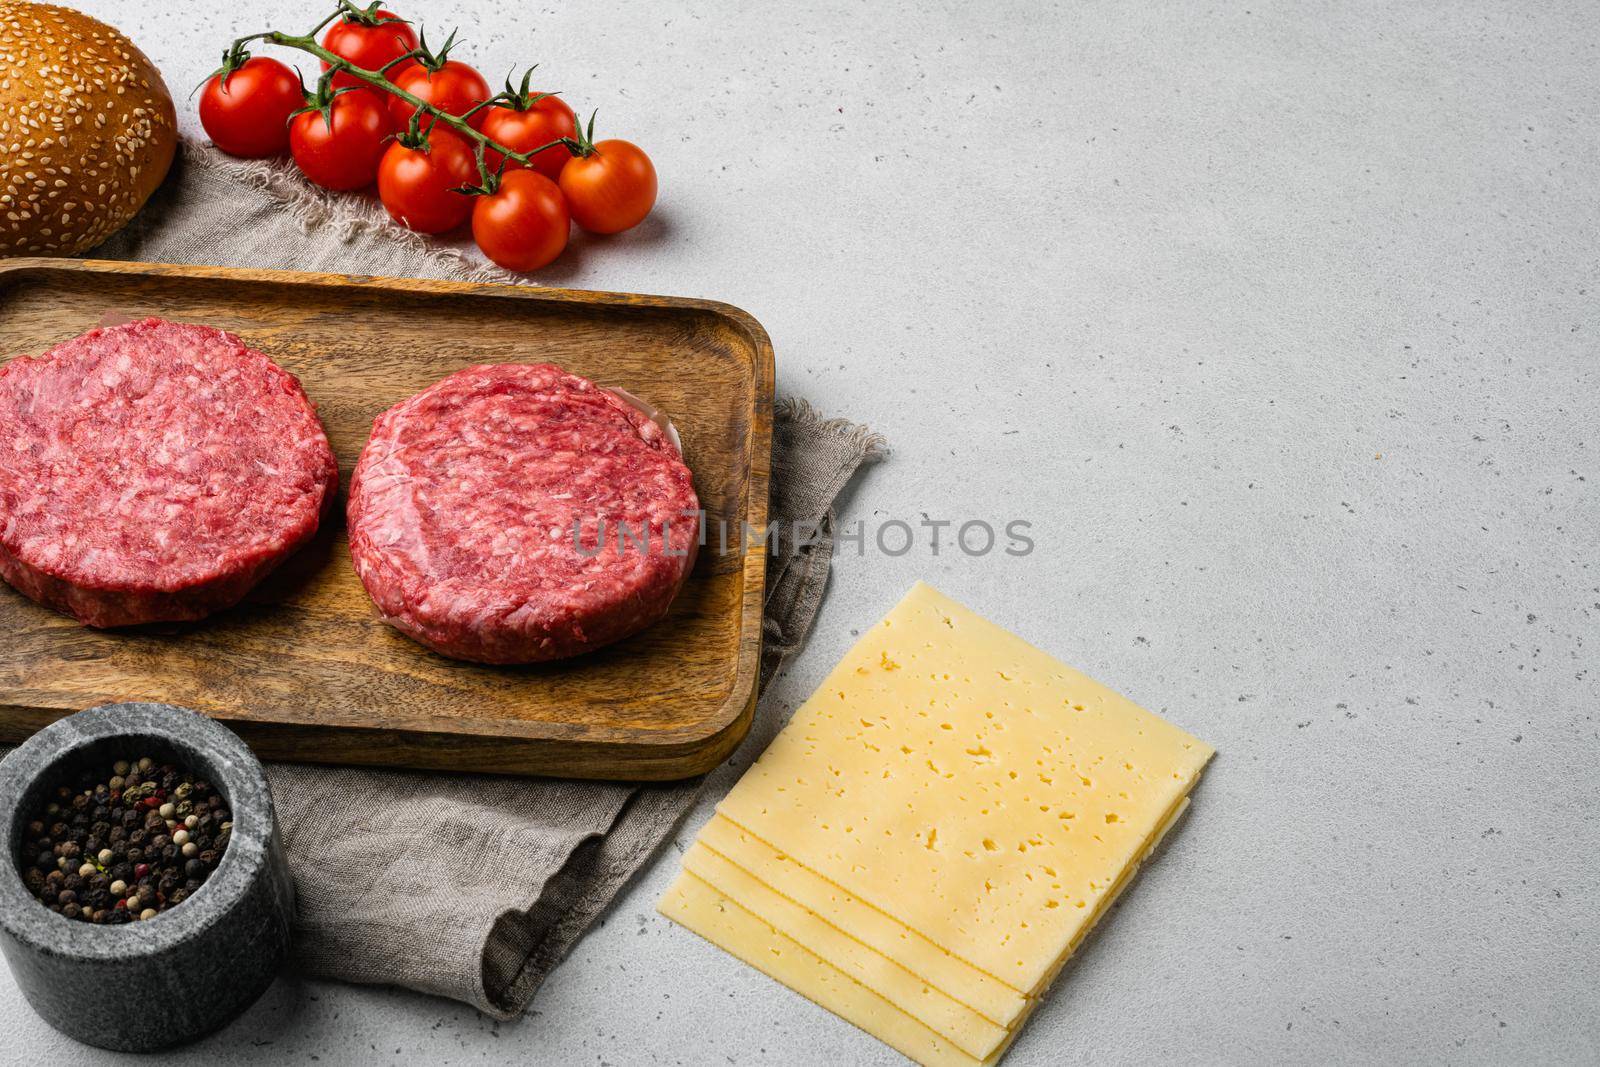 Home Handmade Raw Minced Beef steak burgers on gray stone table background, with copy space for text by Ilianesolenyi